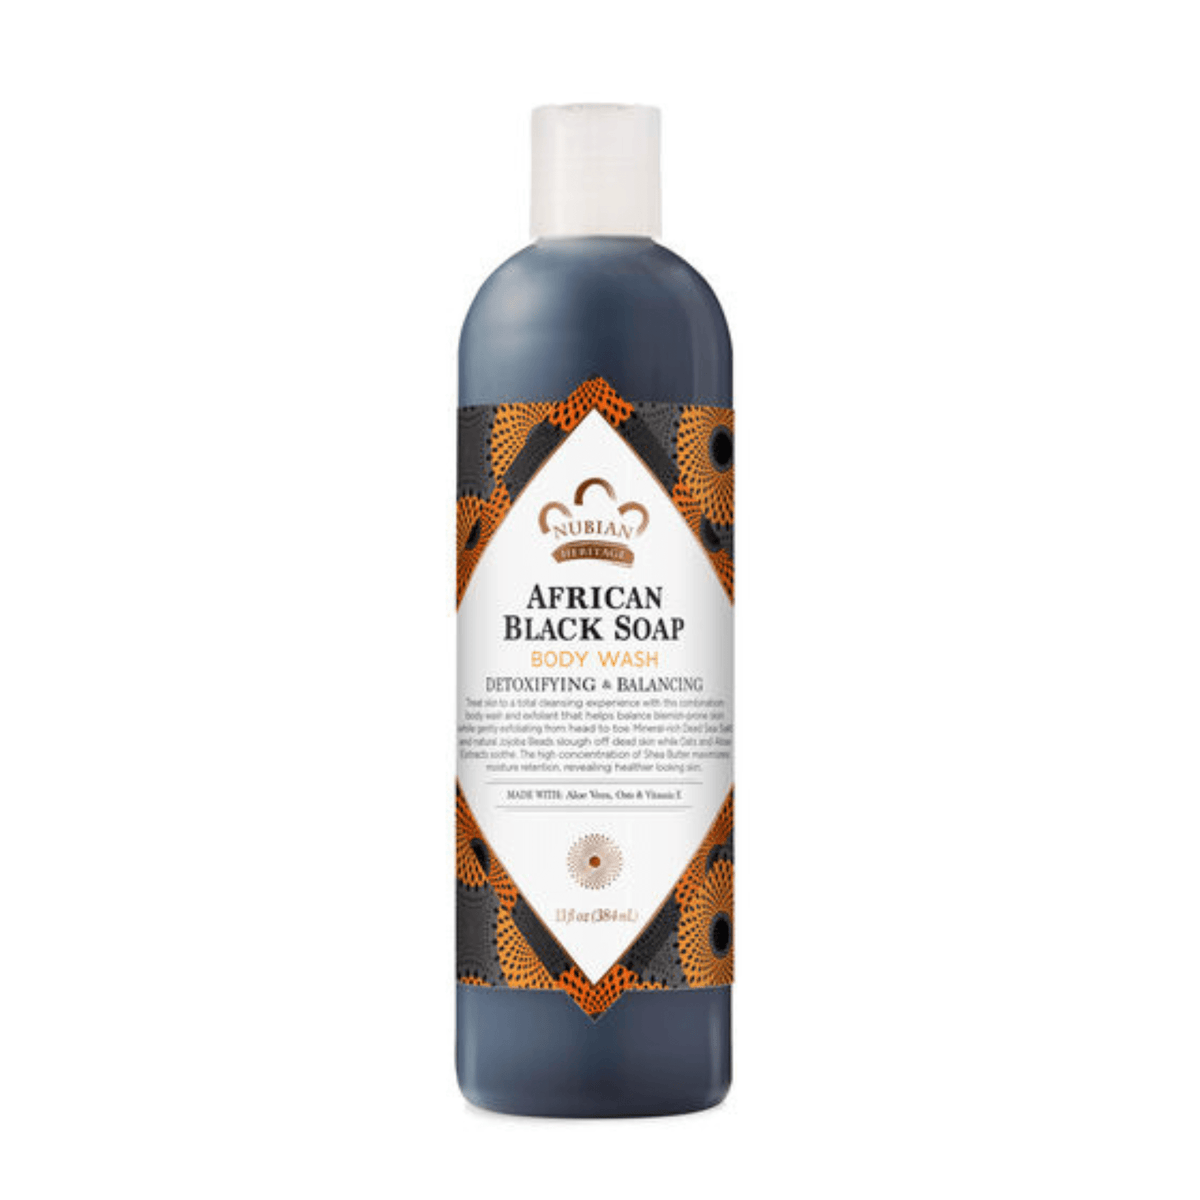 Primary Image of African Black Soap Body Wash